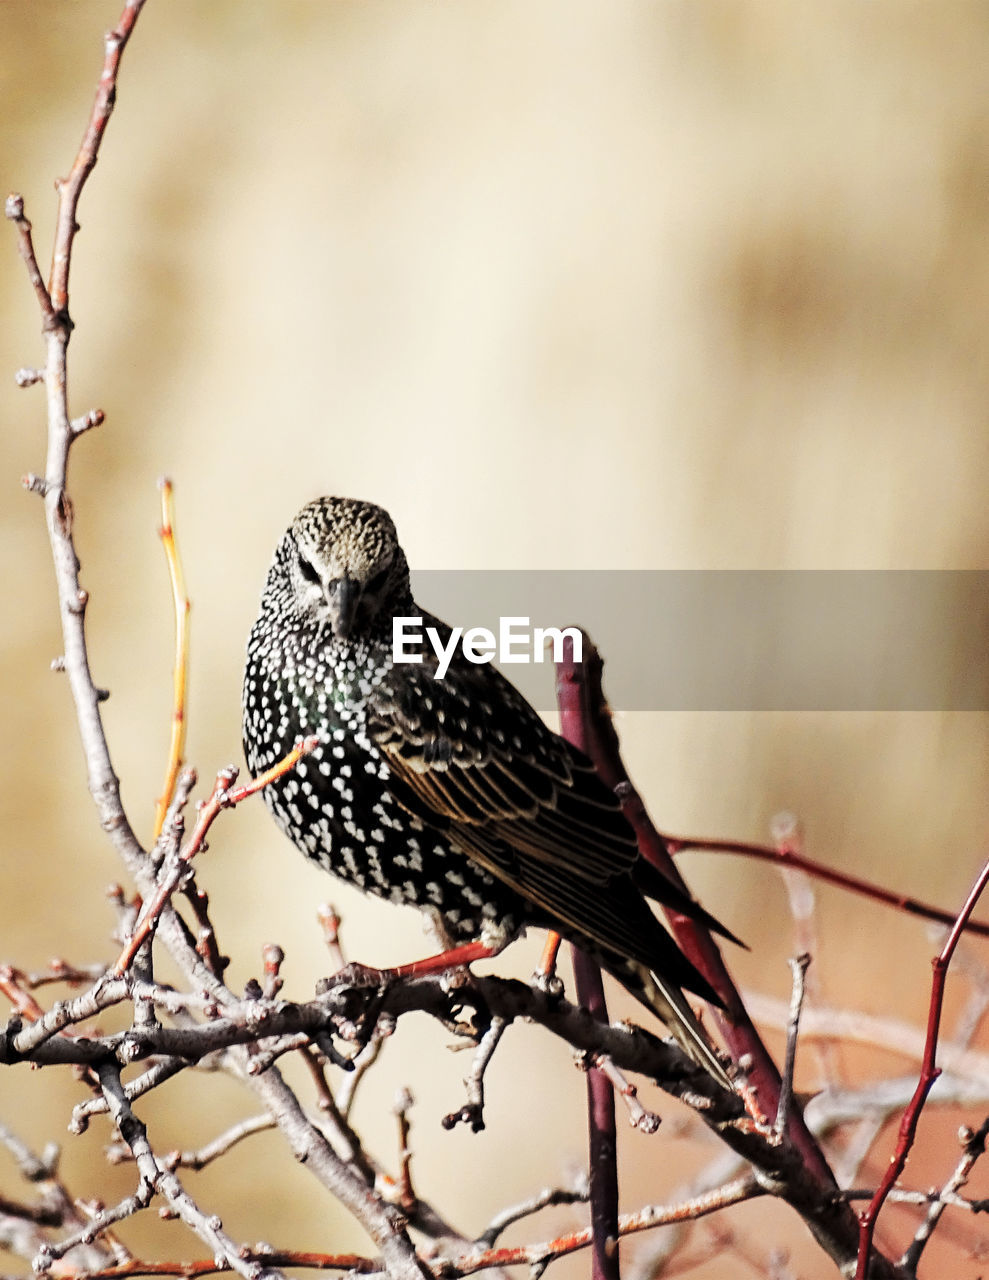 Starling perching on dried plants